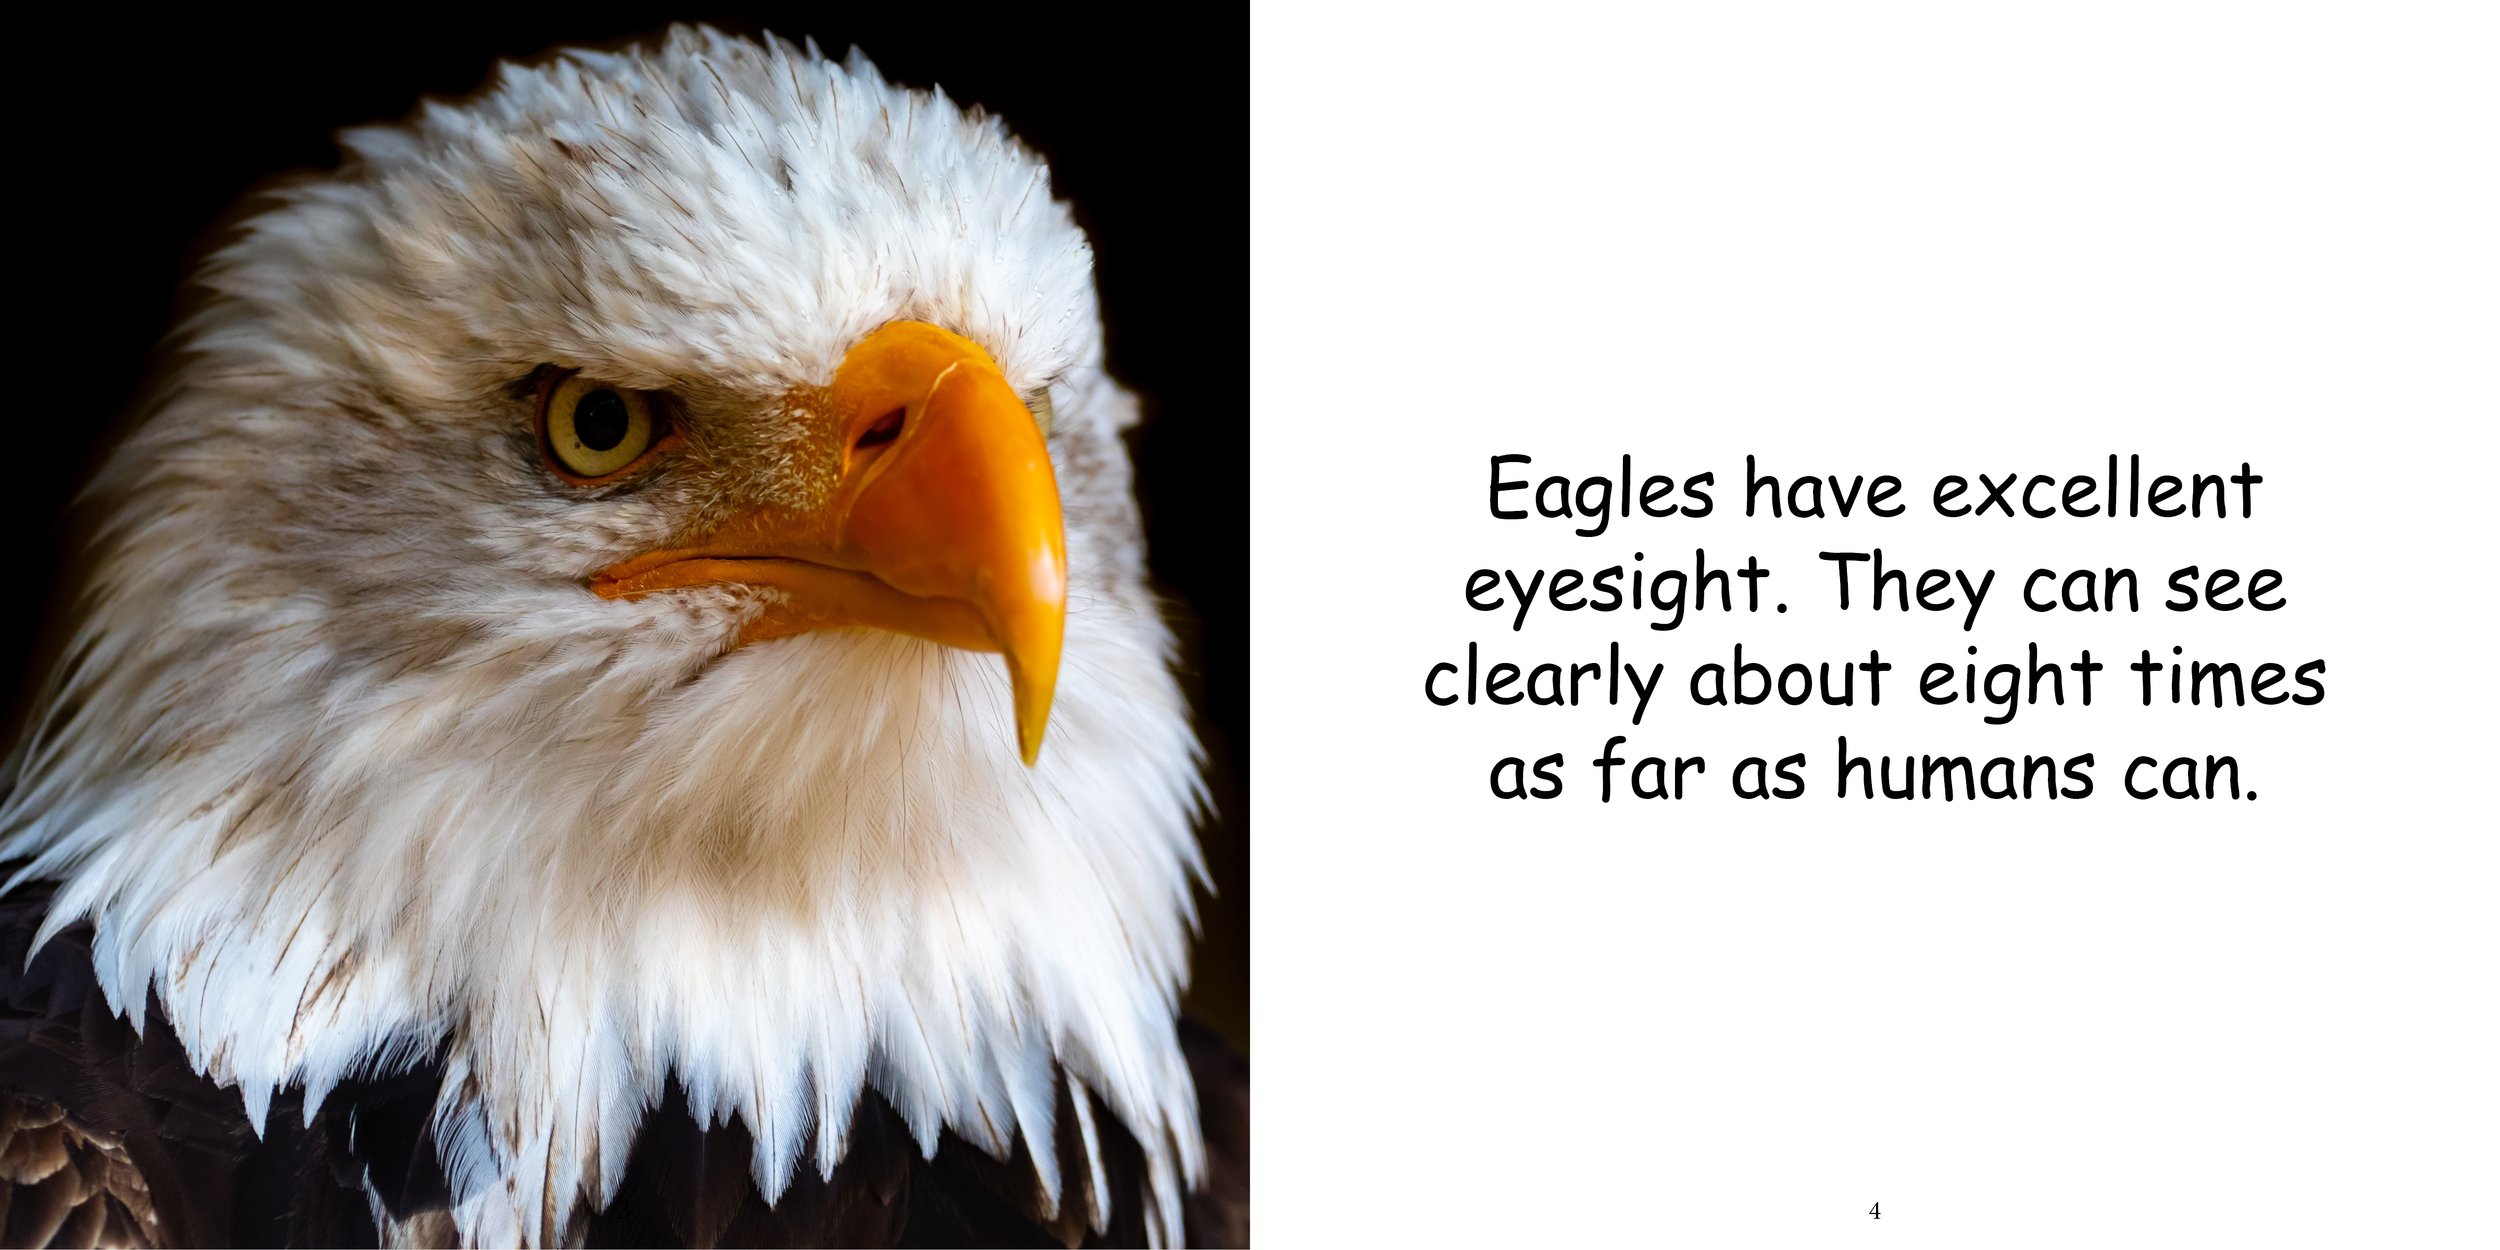 Everything about Eagles - Animal Series7.jpg